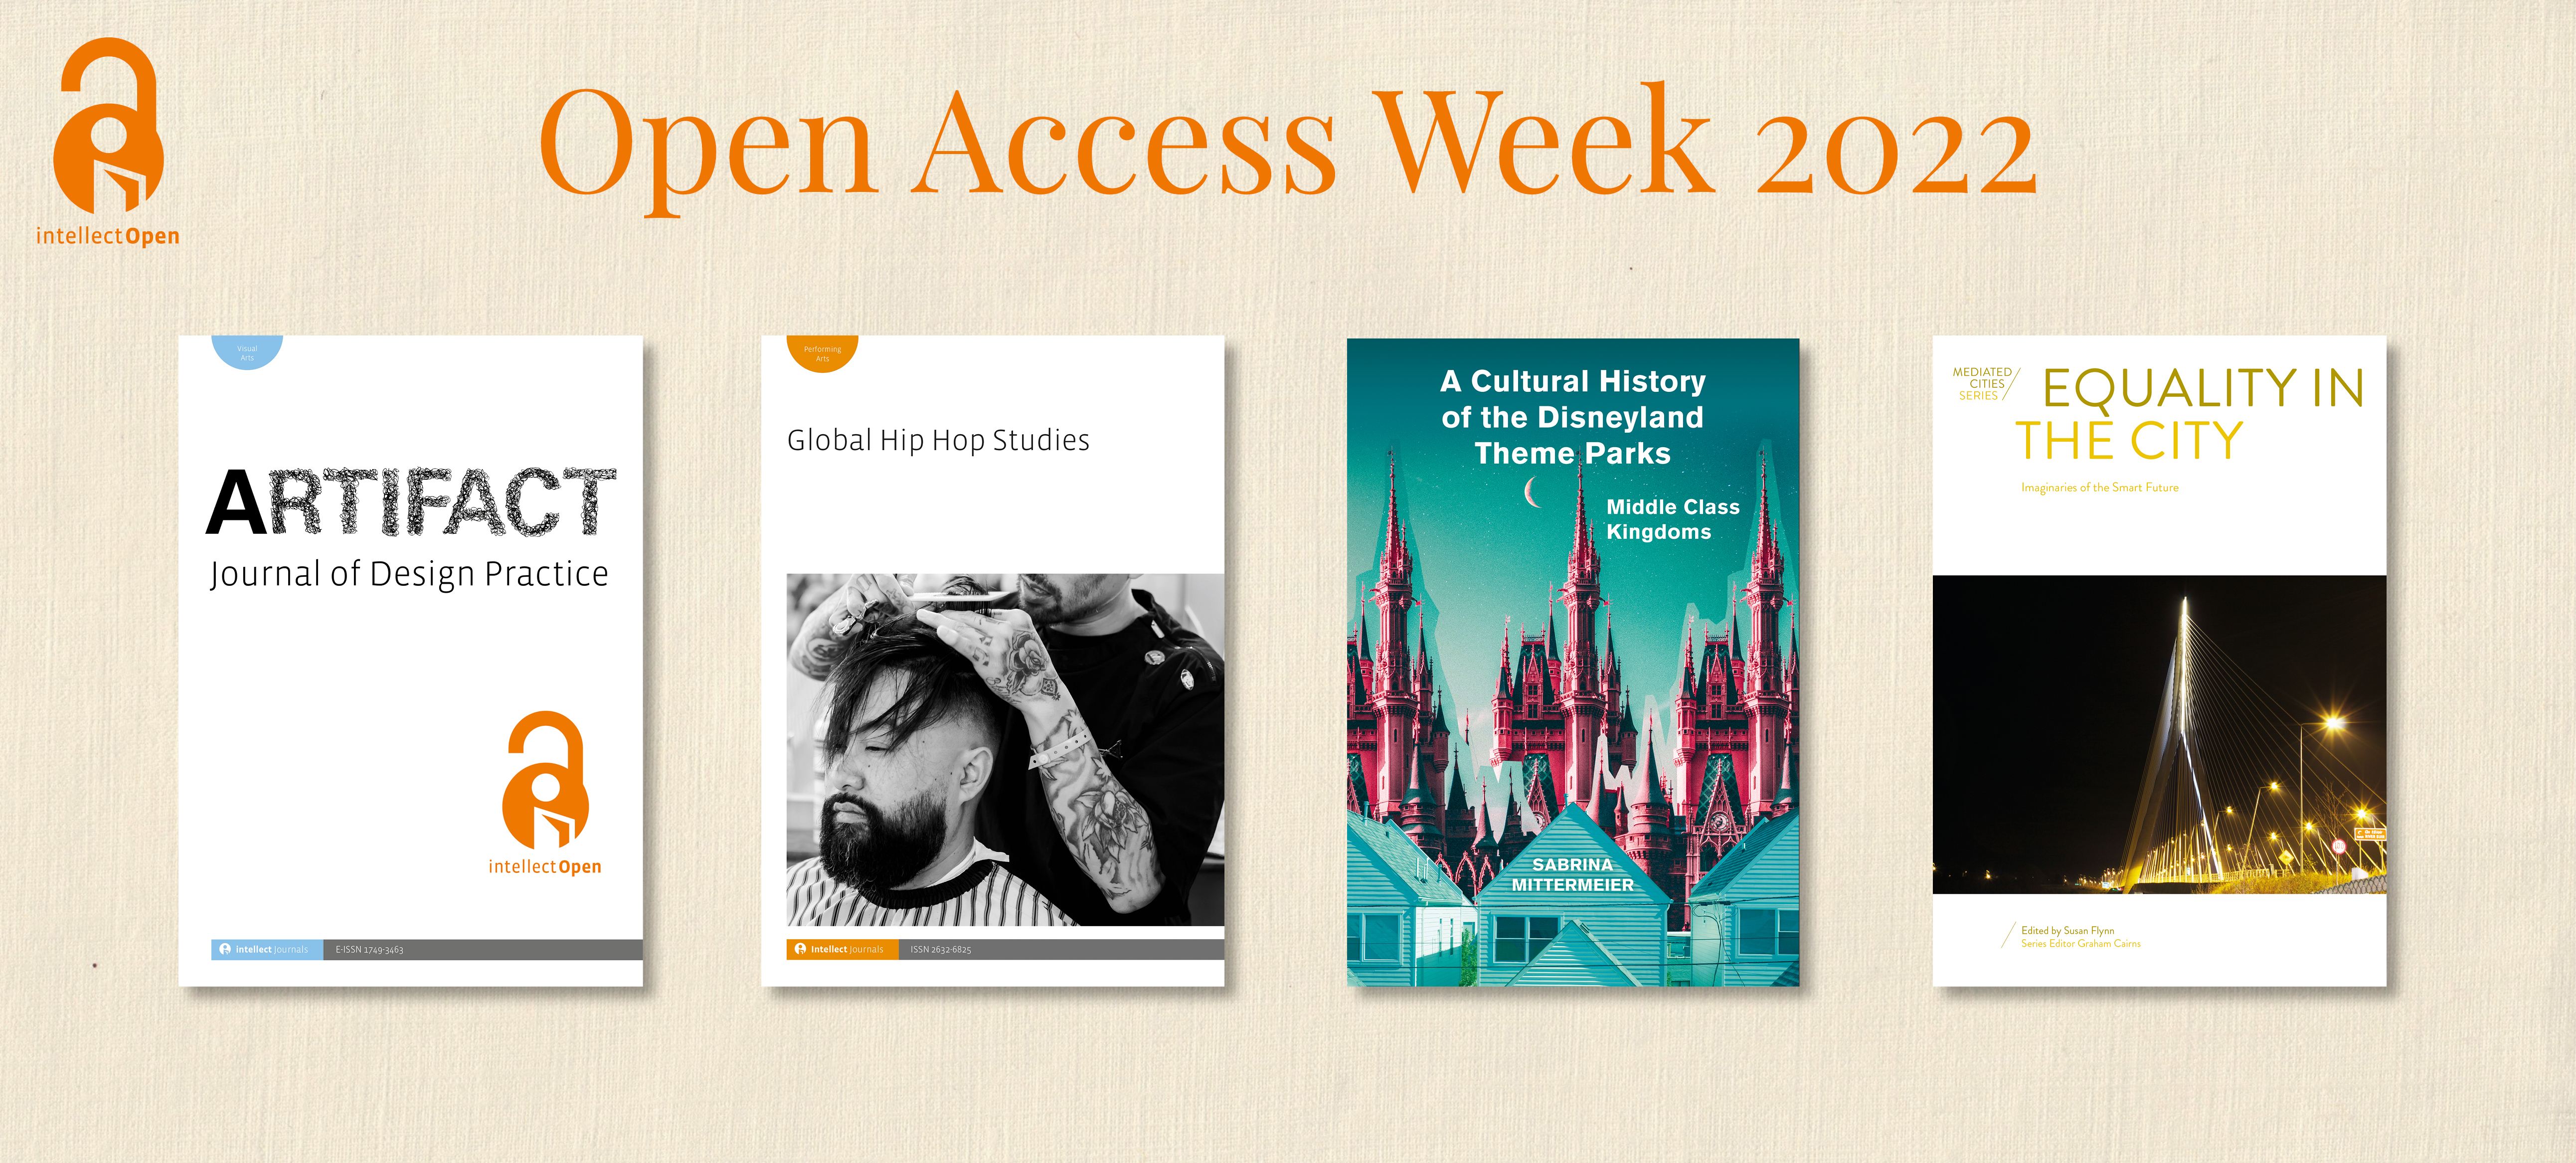 Celebrate Open Access Week with Intellect!